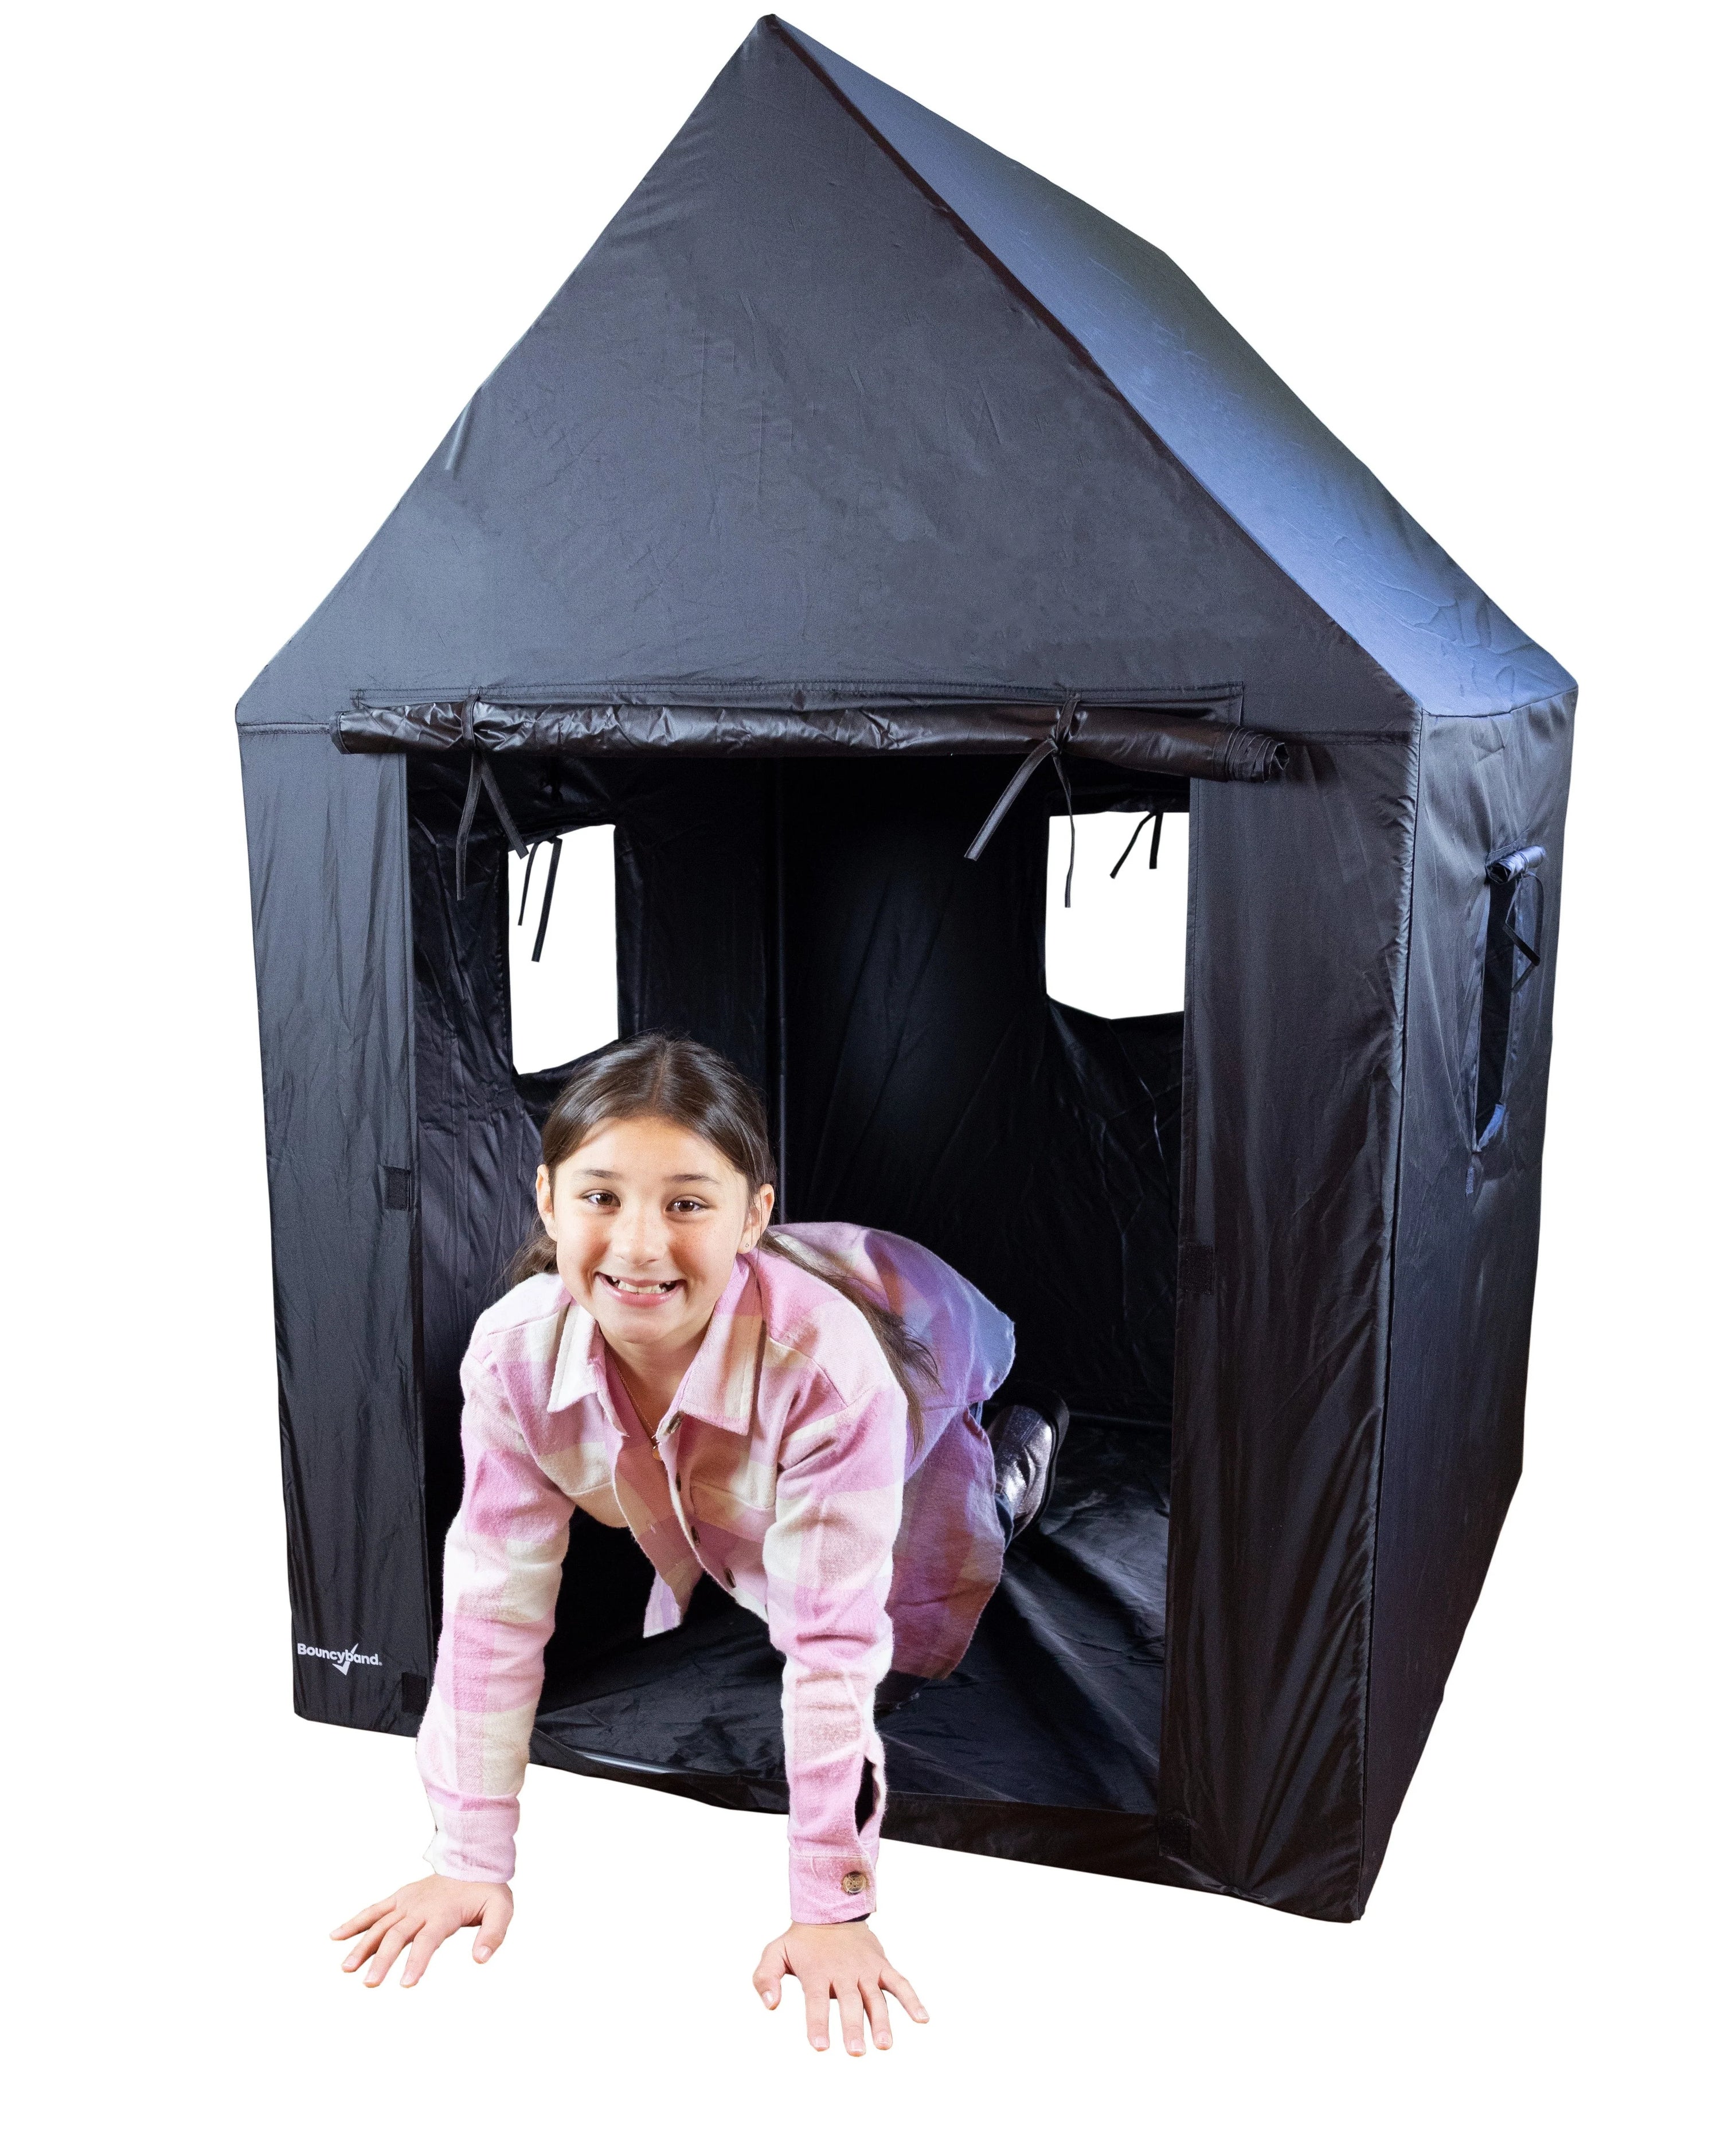 A child with light skin tone and a dark brown ponytail is on their hands and knees, half in and half out of the Indoor Framed Dark Den.